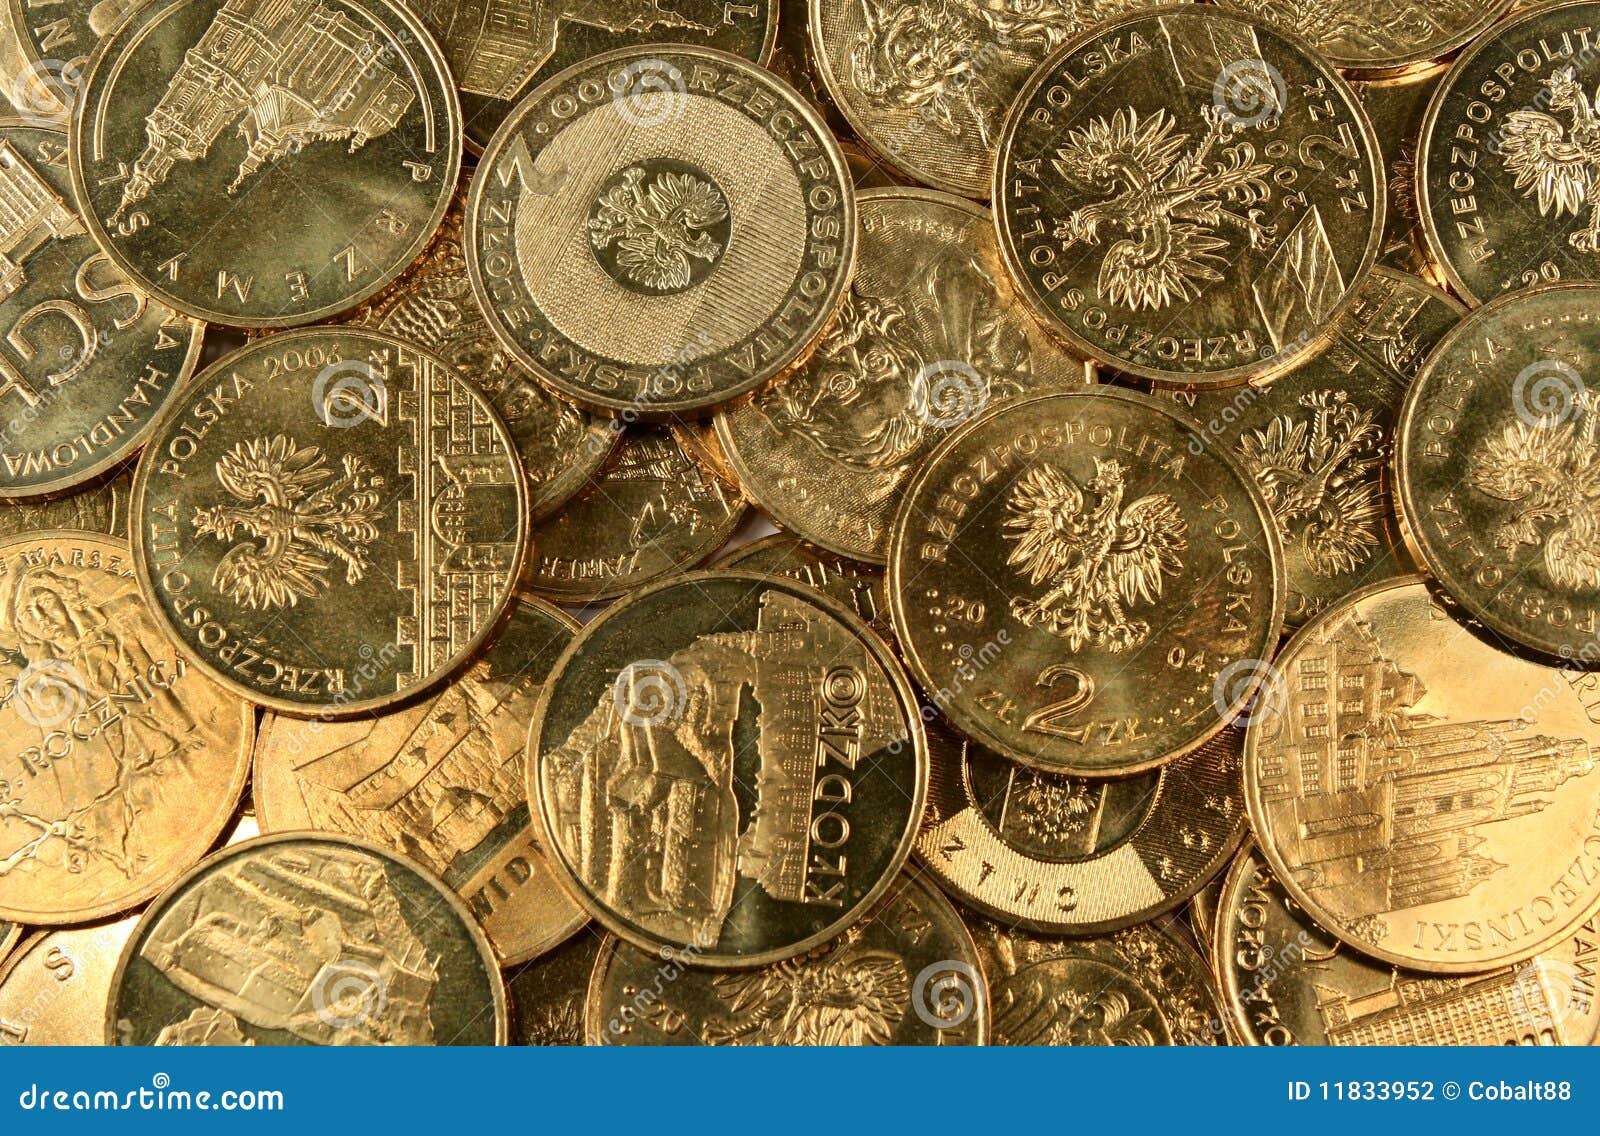 Gold coins background stock photo. Image of payment, metallic - 11833952